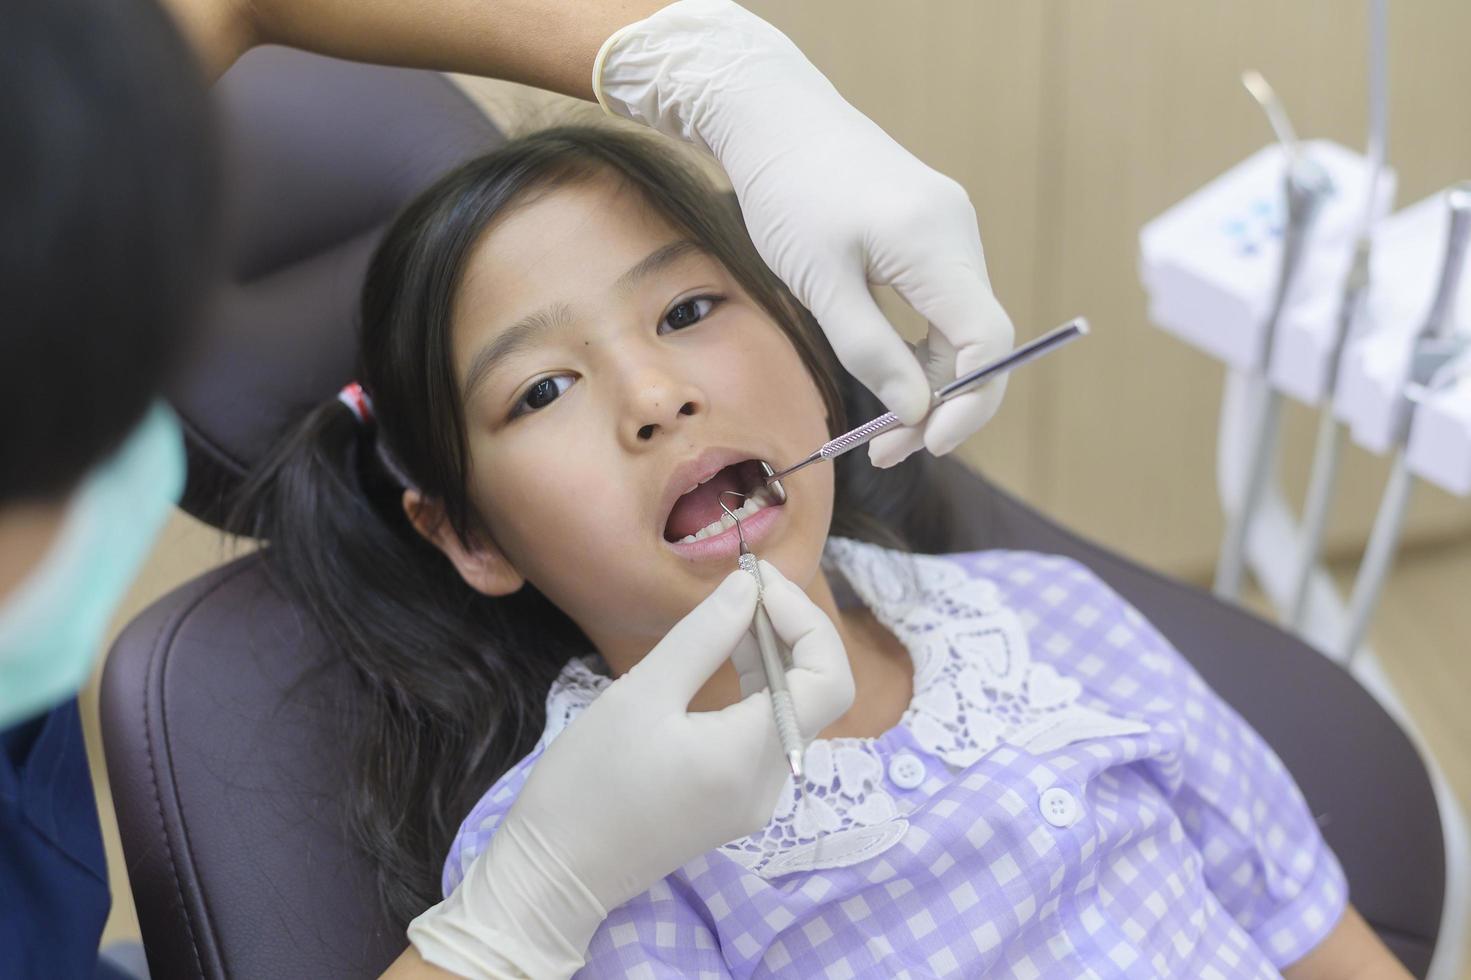 A little cute girl having teeth examined by dentist in dental clinic, teeth check-up and Healthy teeth concept photo